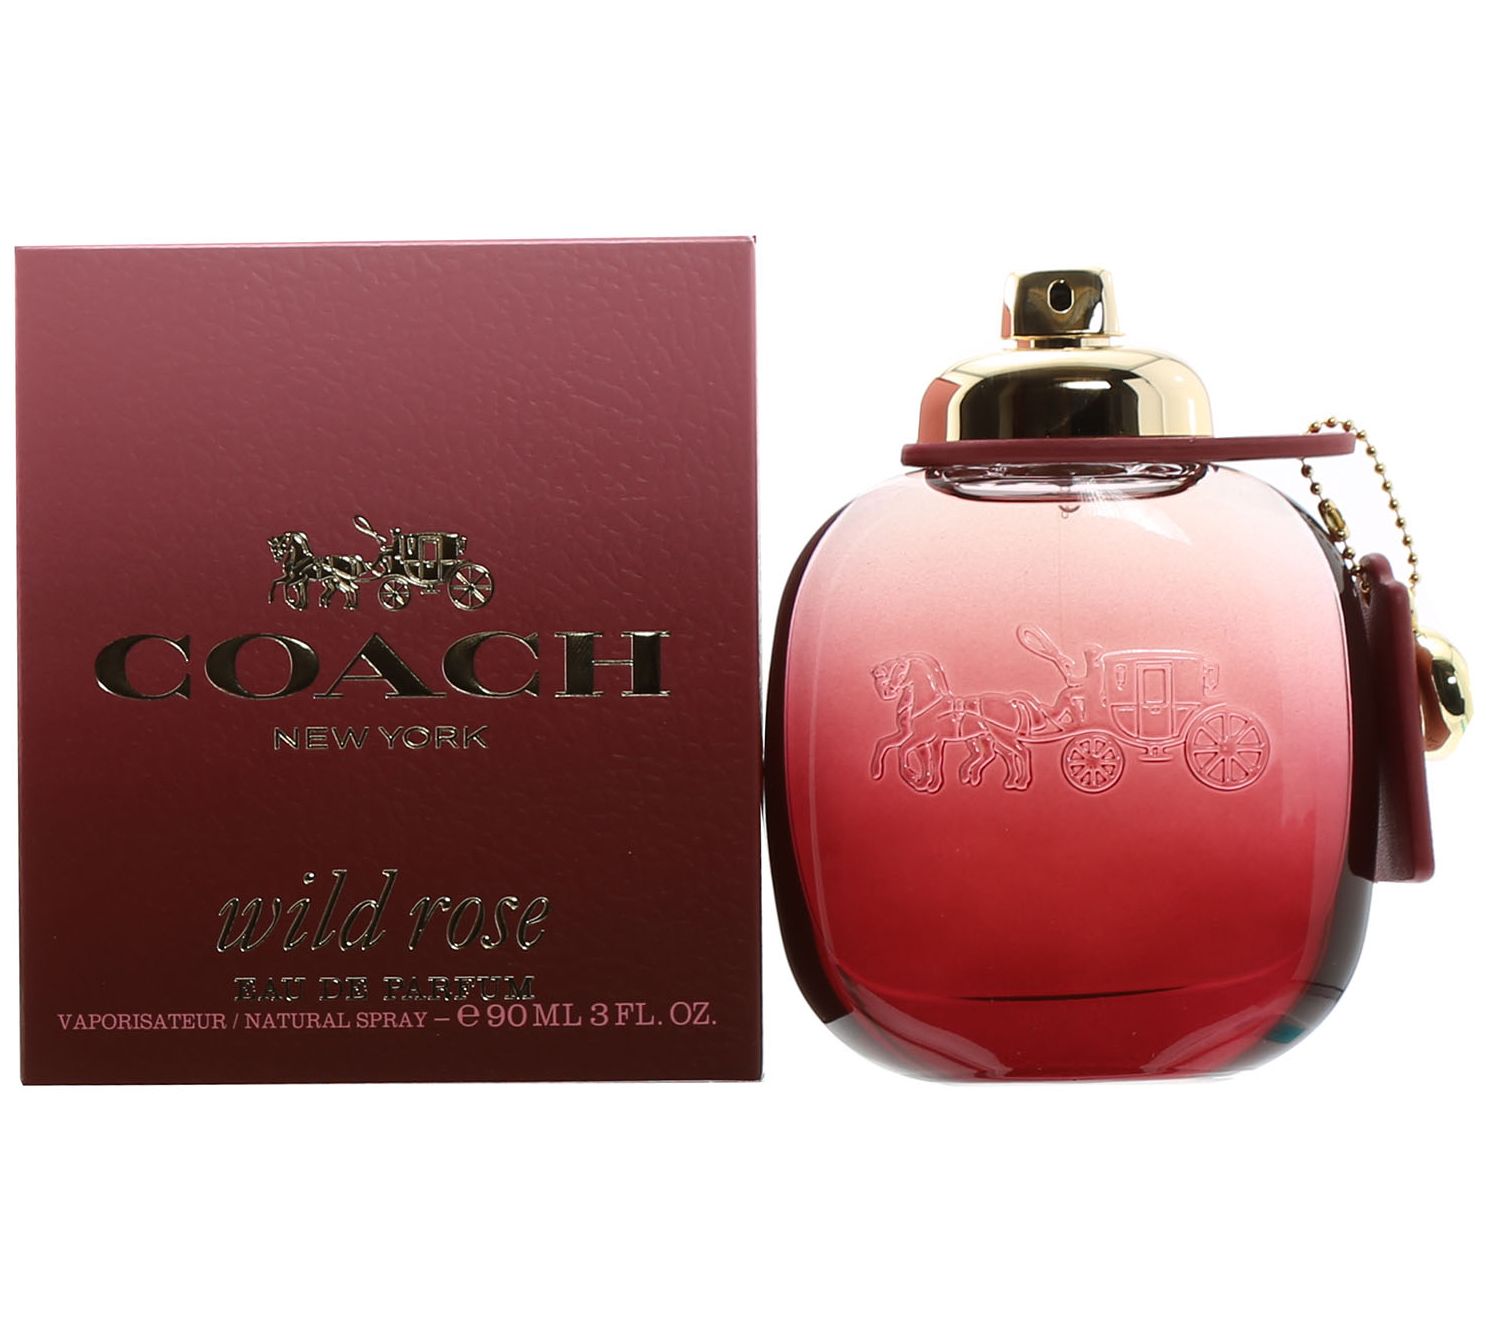 Coach Wild Rose EdP 3 fl oz • See best prices today »